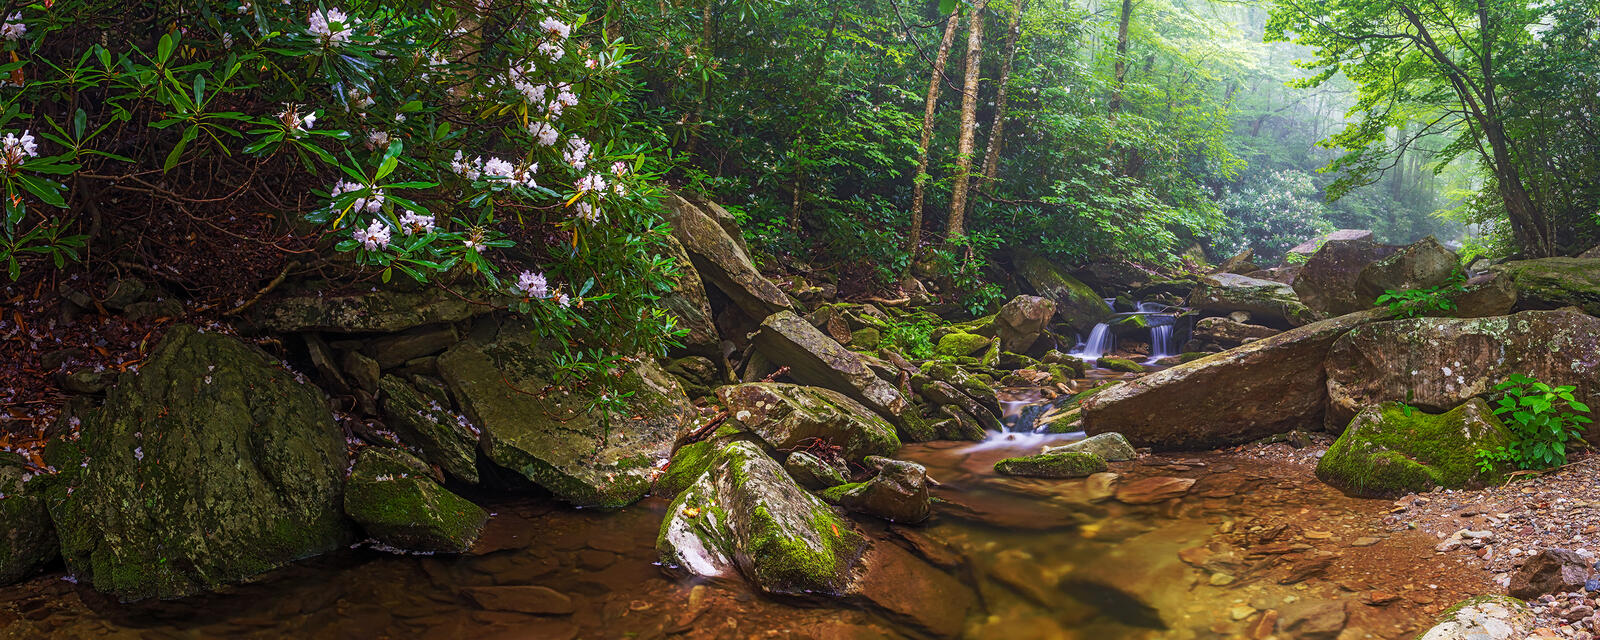 Wallpapers Boone Fork Creek Panorama North Carolina forest on the desktop